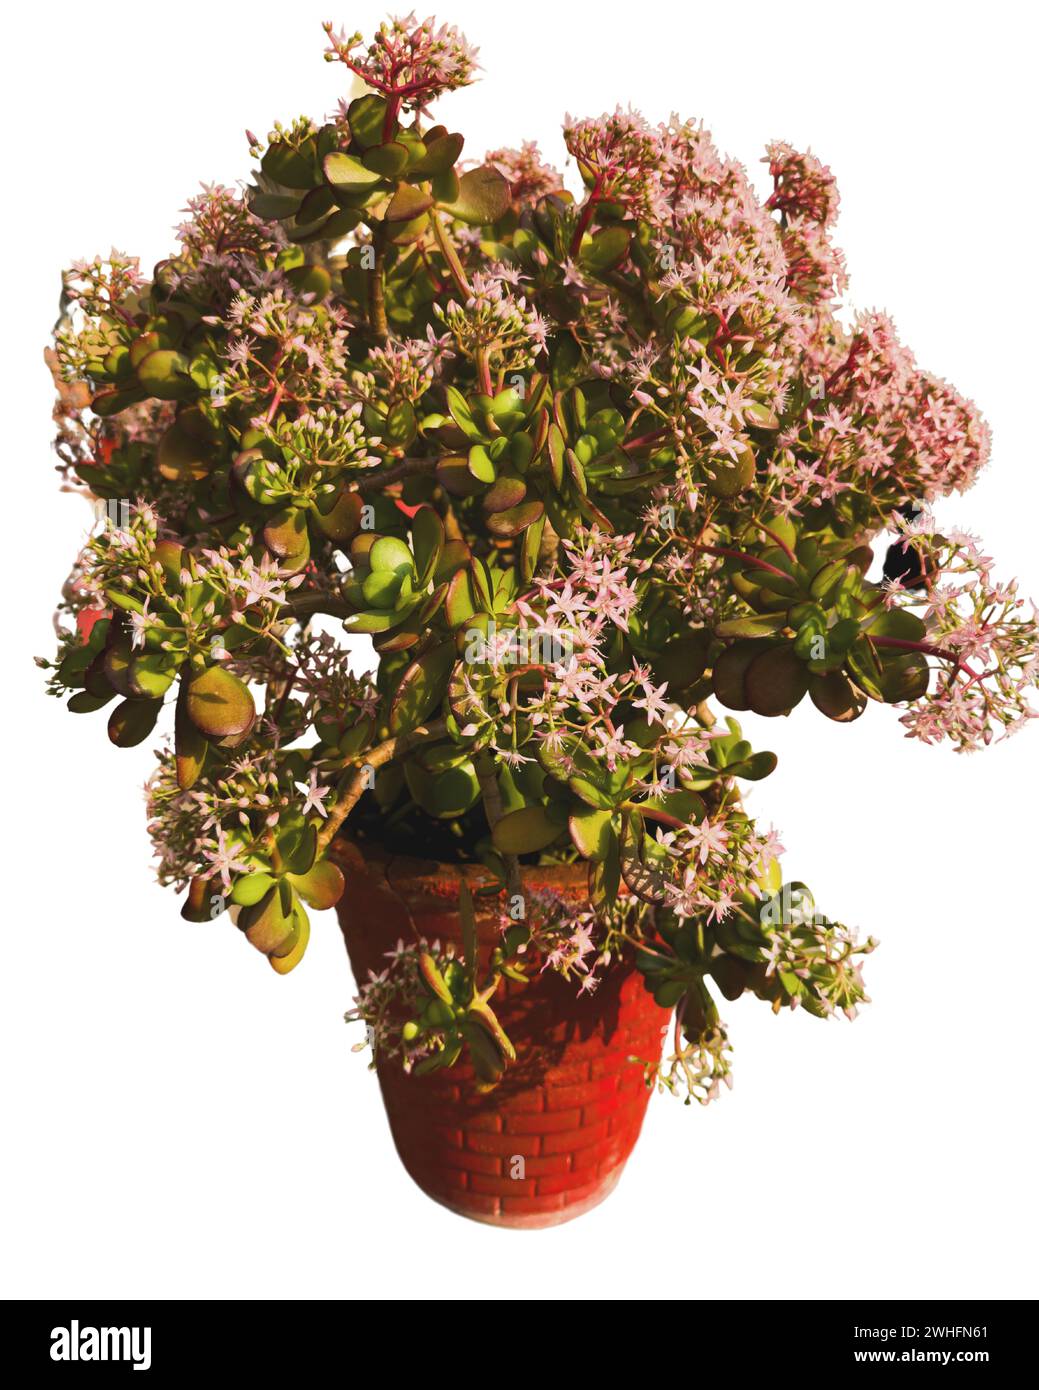 Beautiful crassula ovata plant with thick branches full of flower Stock Photo